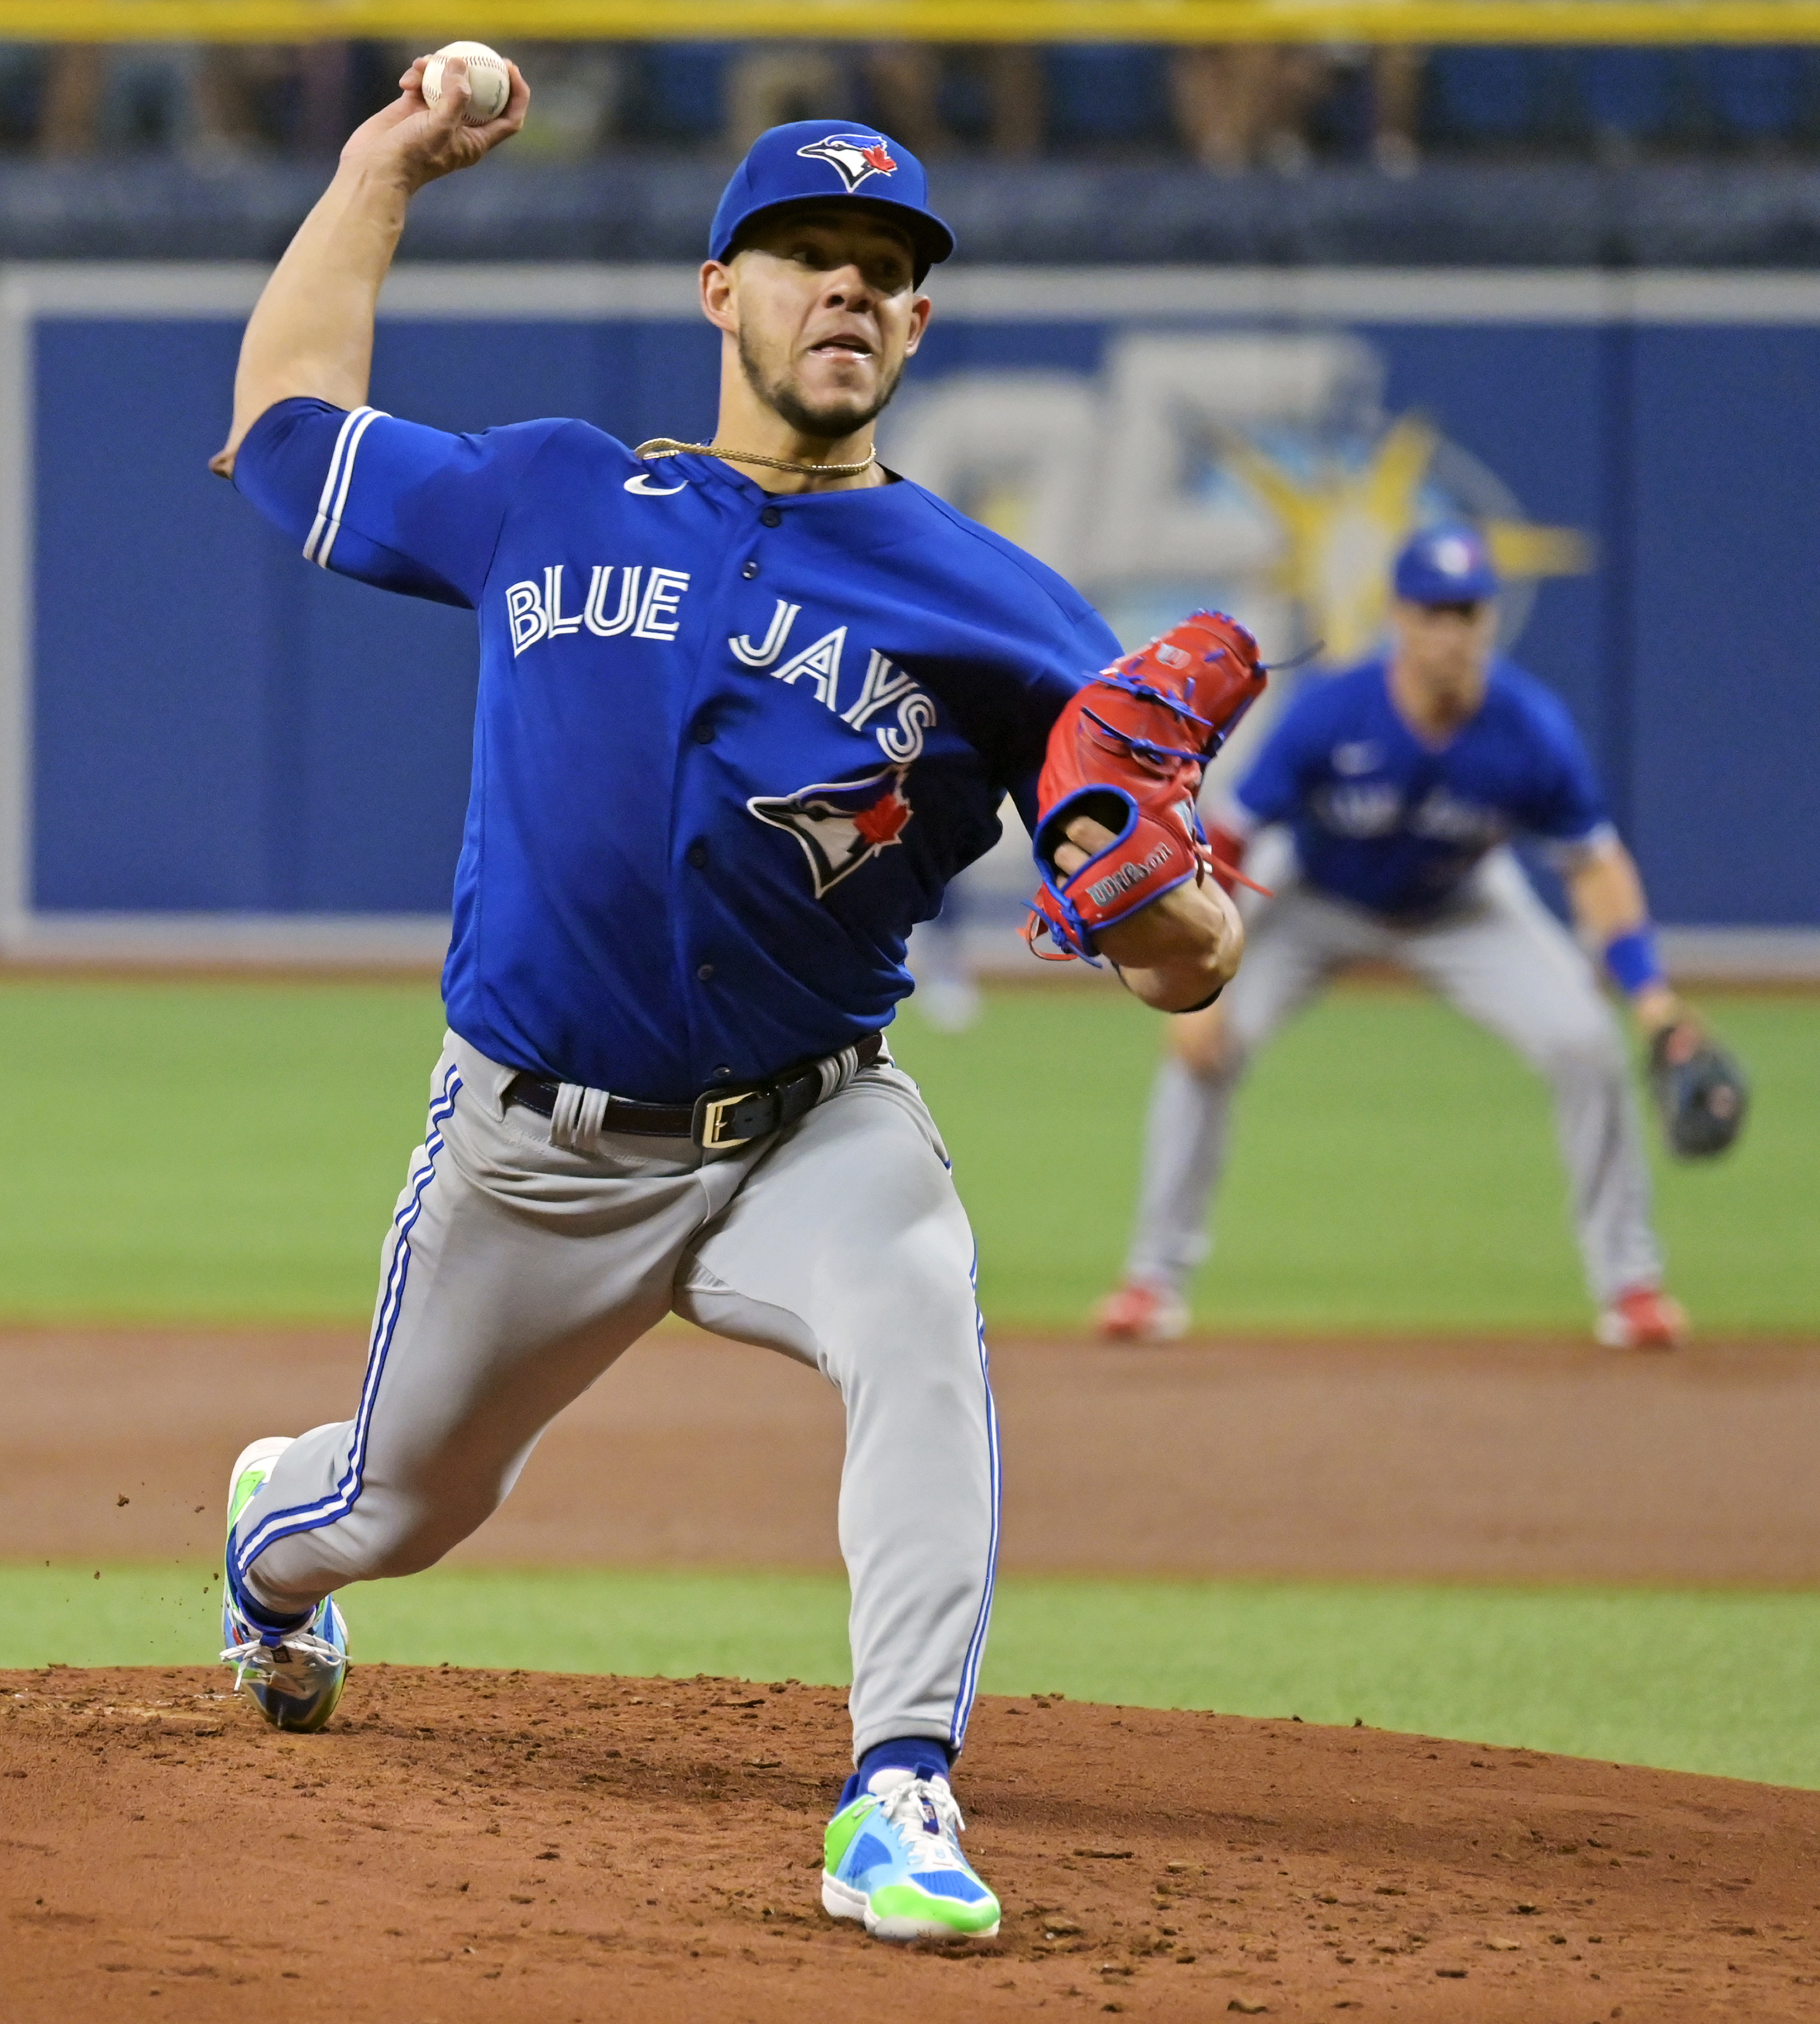 Blue Jays rout Rays 20-1 as Guerrero Jr has 6 RBIs, position players give  up 10 runs